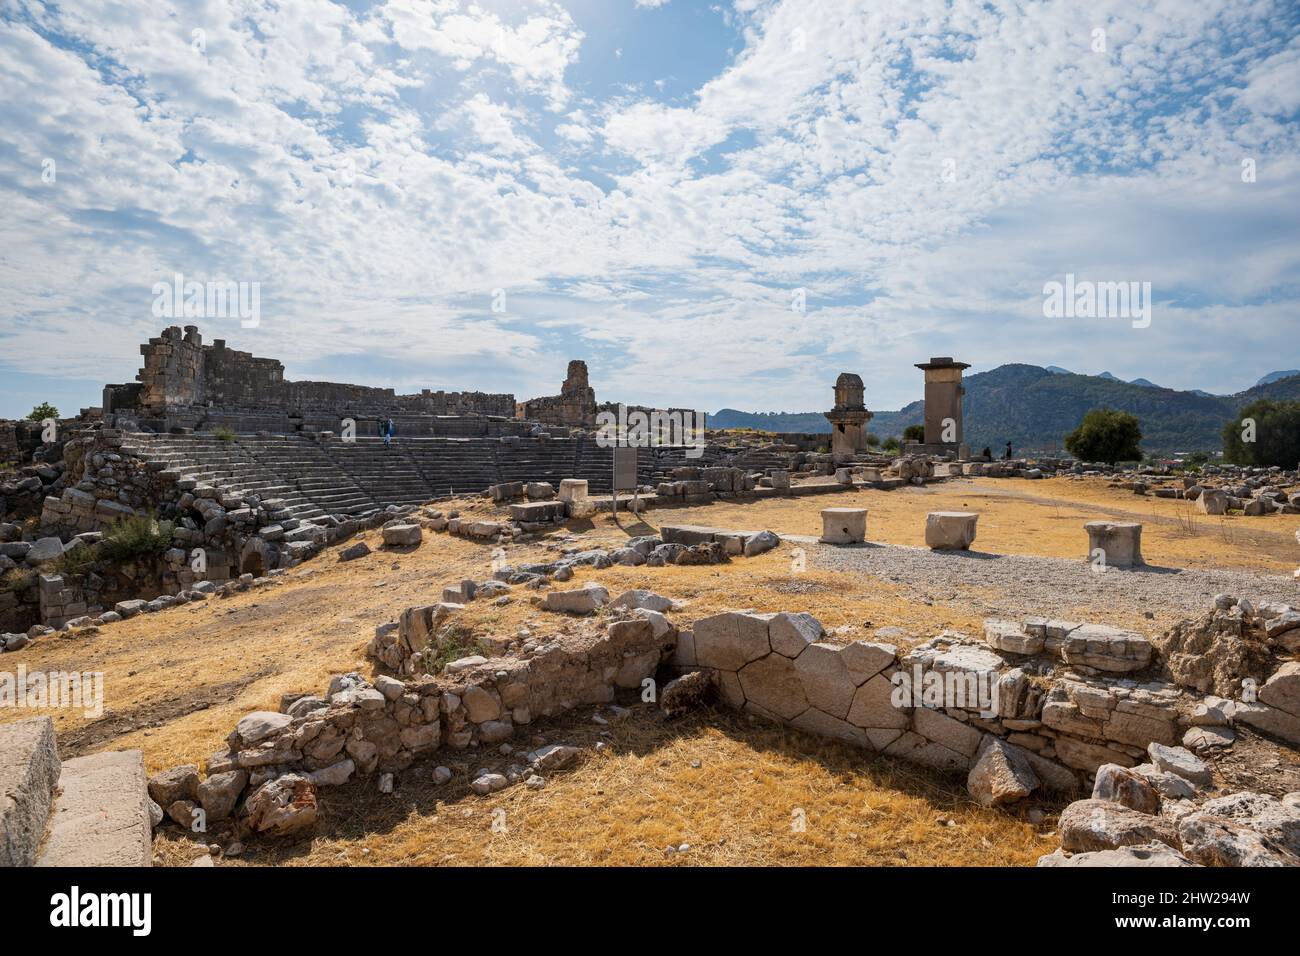 Xanthos archeological site in Turkey. Xanthos, which was the capital of ancient Lycia and is on the UNESCO World Heritage Sites list. Stock Photo